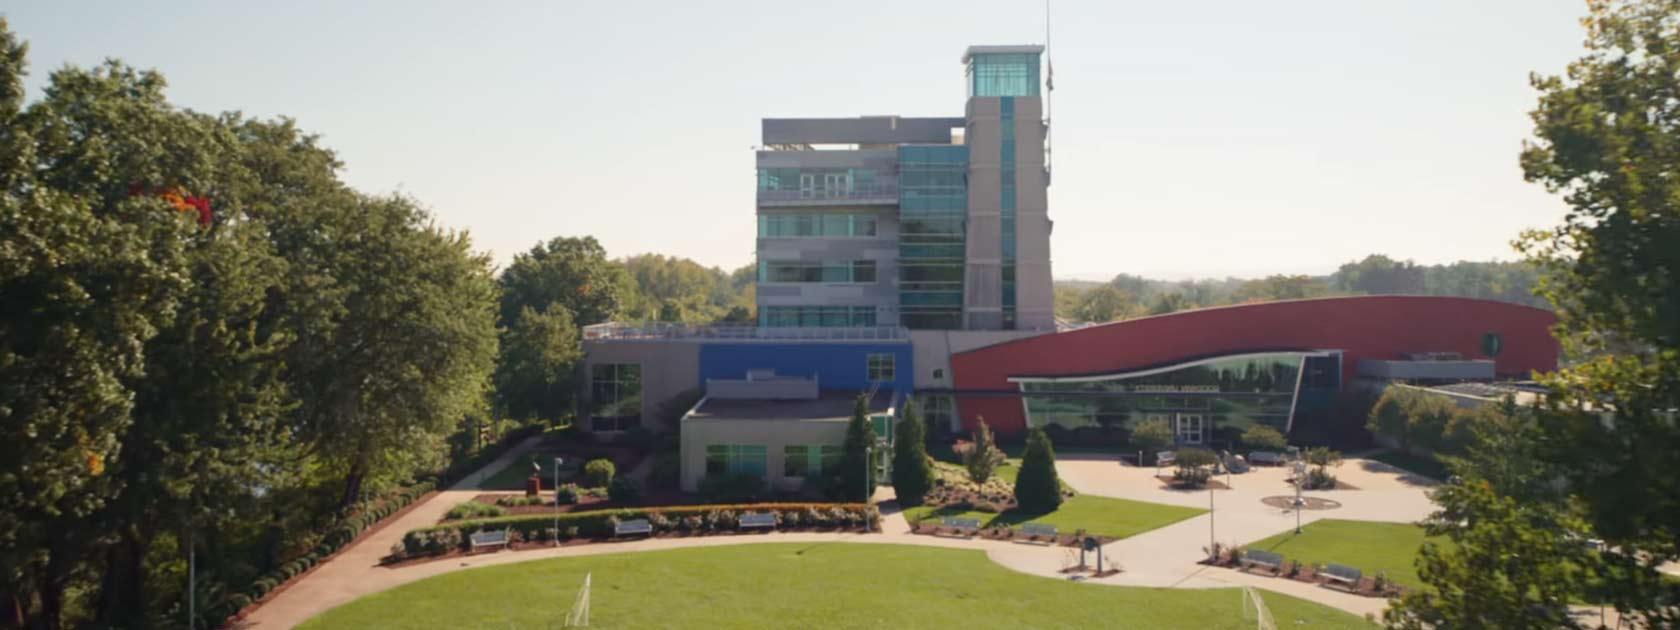 aerial view of Goodwin’s campus